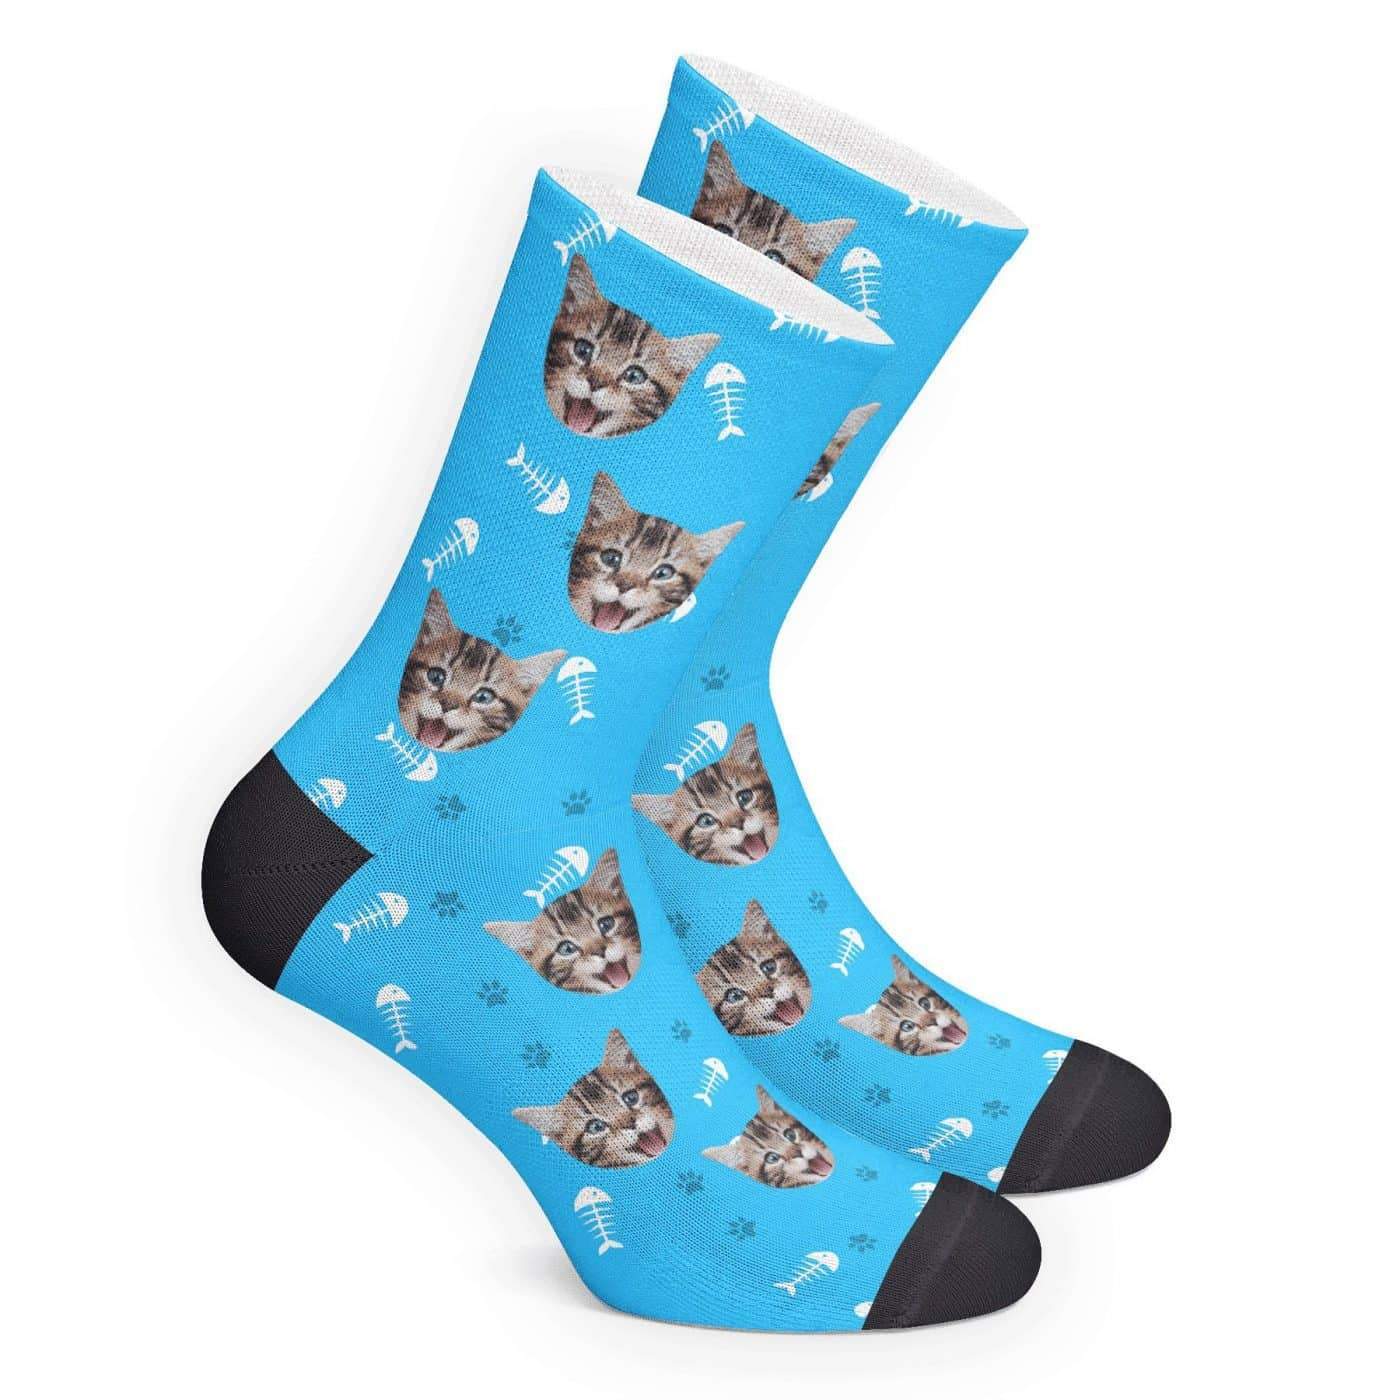 Christmas Gifts, Custom Face Socks 3D Preview - Cat